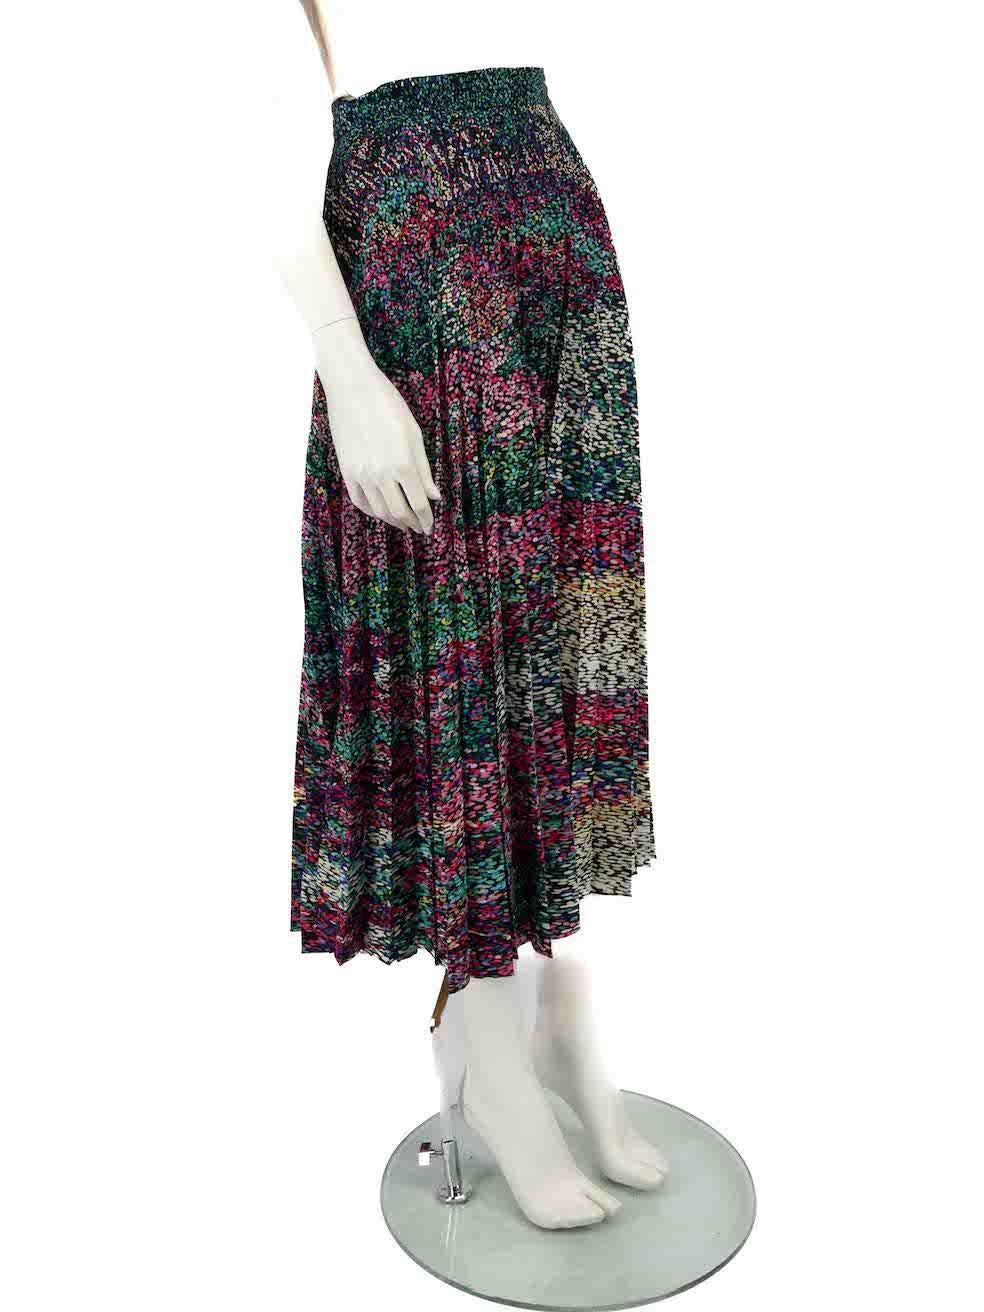 CONDITION is Very good. Hardly any visible wear to skirt is evident on this used Mary Katrantzou designer resale item.
 
 
 
 Details
 
 
 Multicolour - green and pink
 
 Polyester
 
 Skirt
 
 Abstract pattern
 
 Pleated
 
 Midi
 
 Side zip and hook